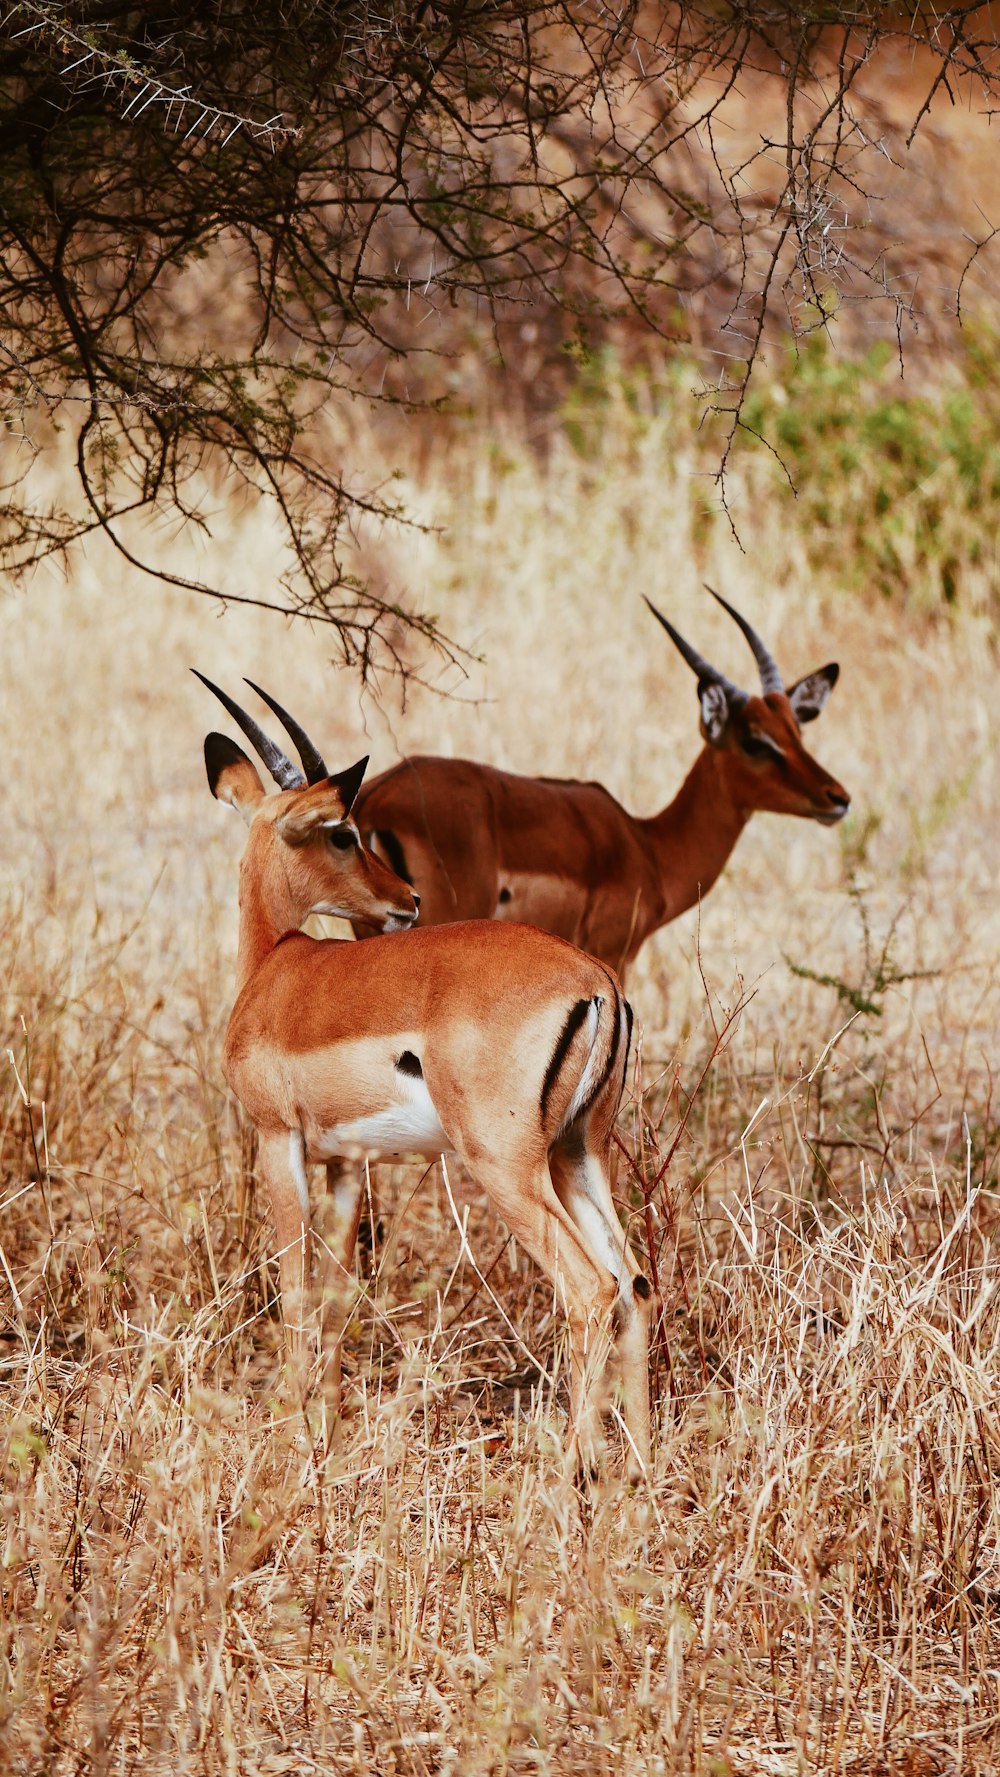 a couple of antelope standing next to each other on a dry grass field